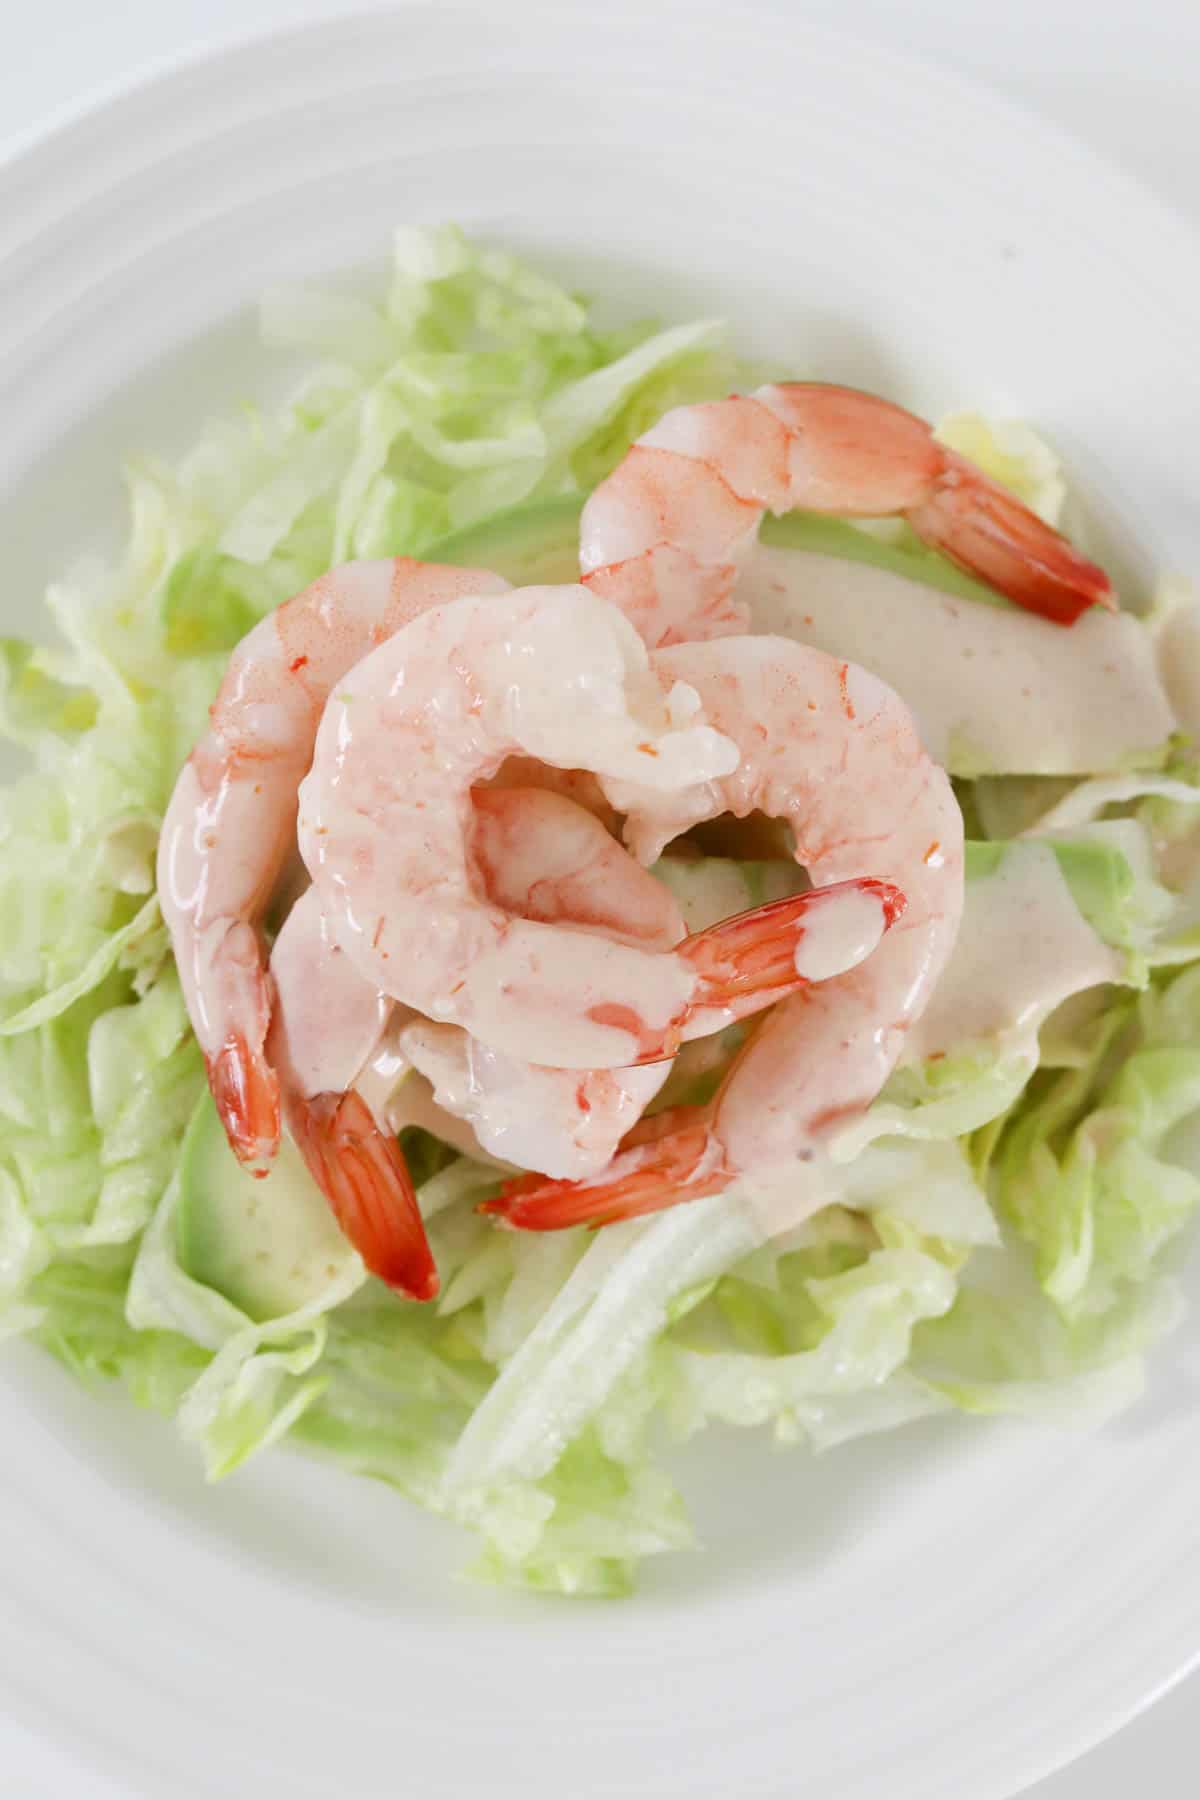 Overhead view of the prawn cocktail salad on a white serving plate drizzled with cocktail sauce.